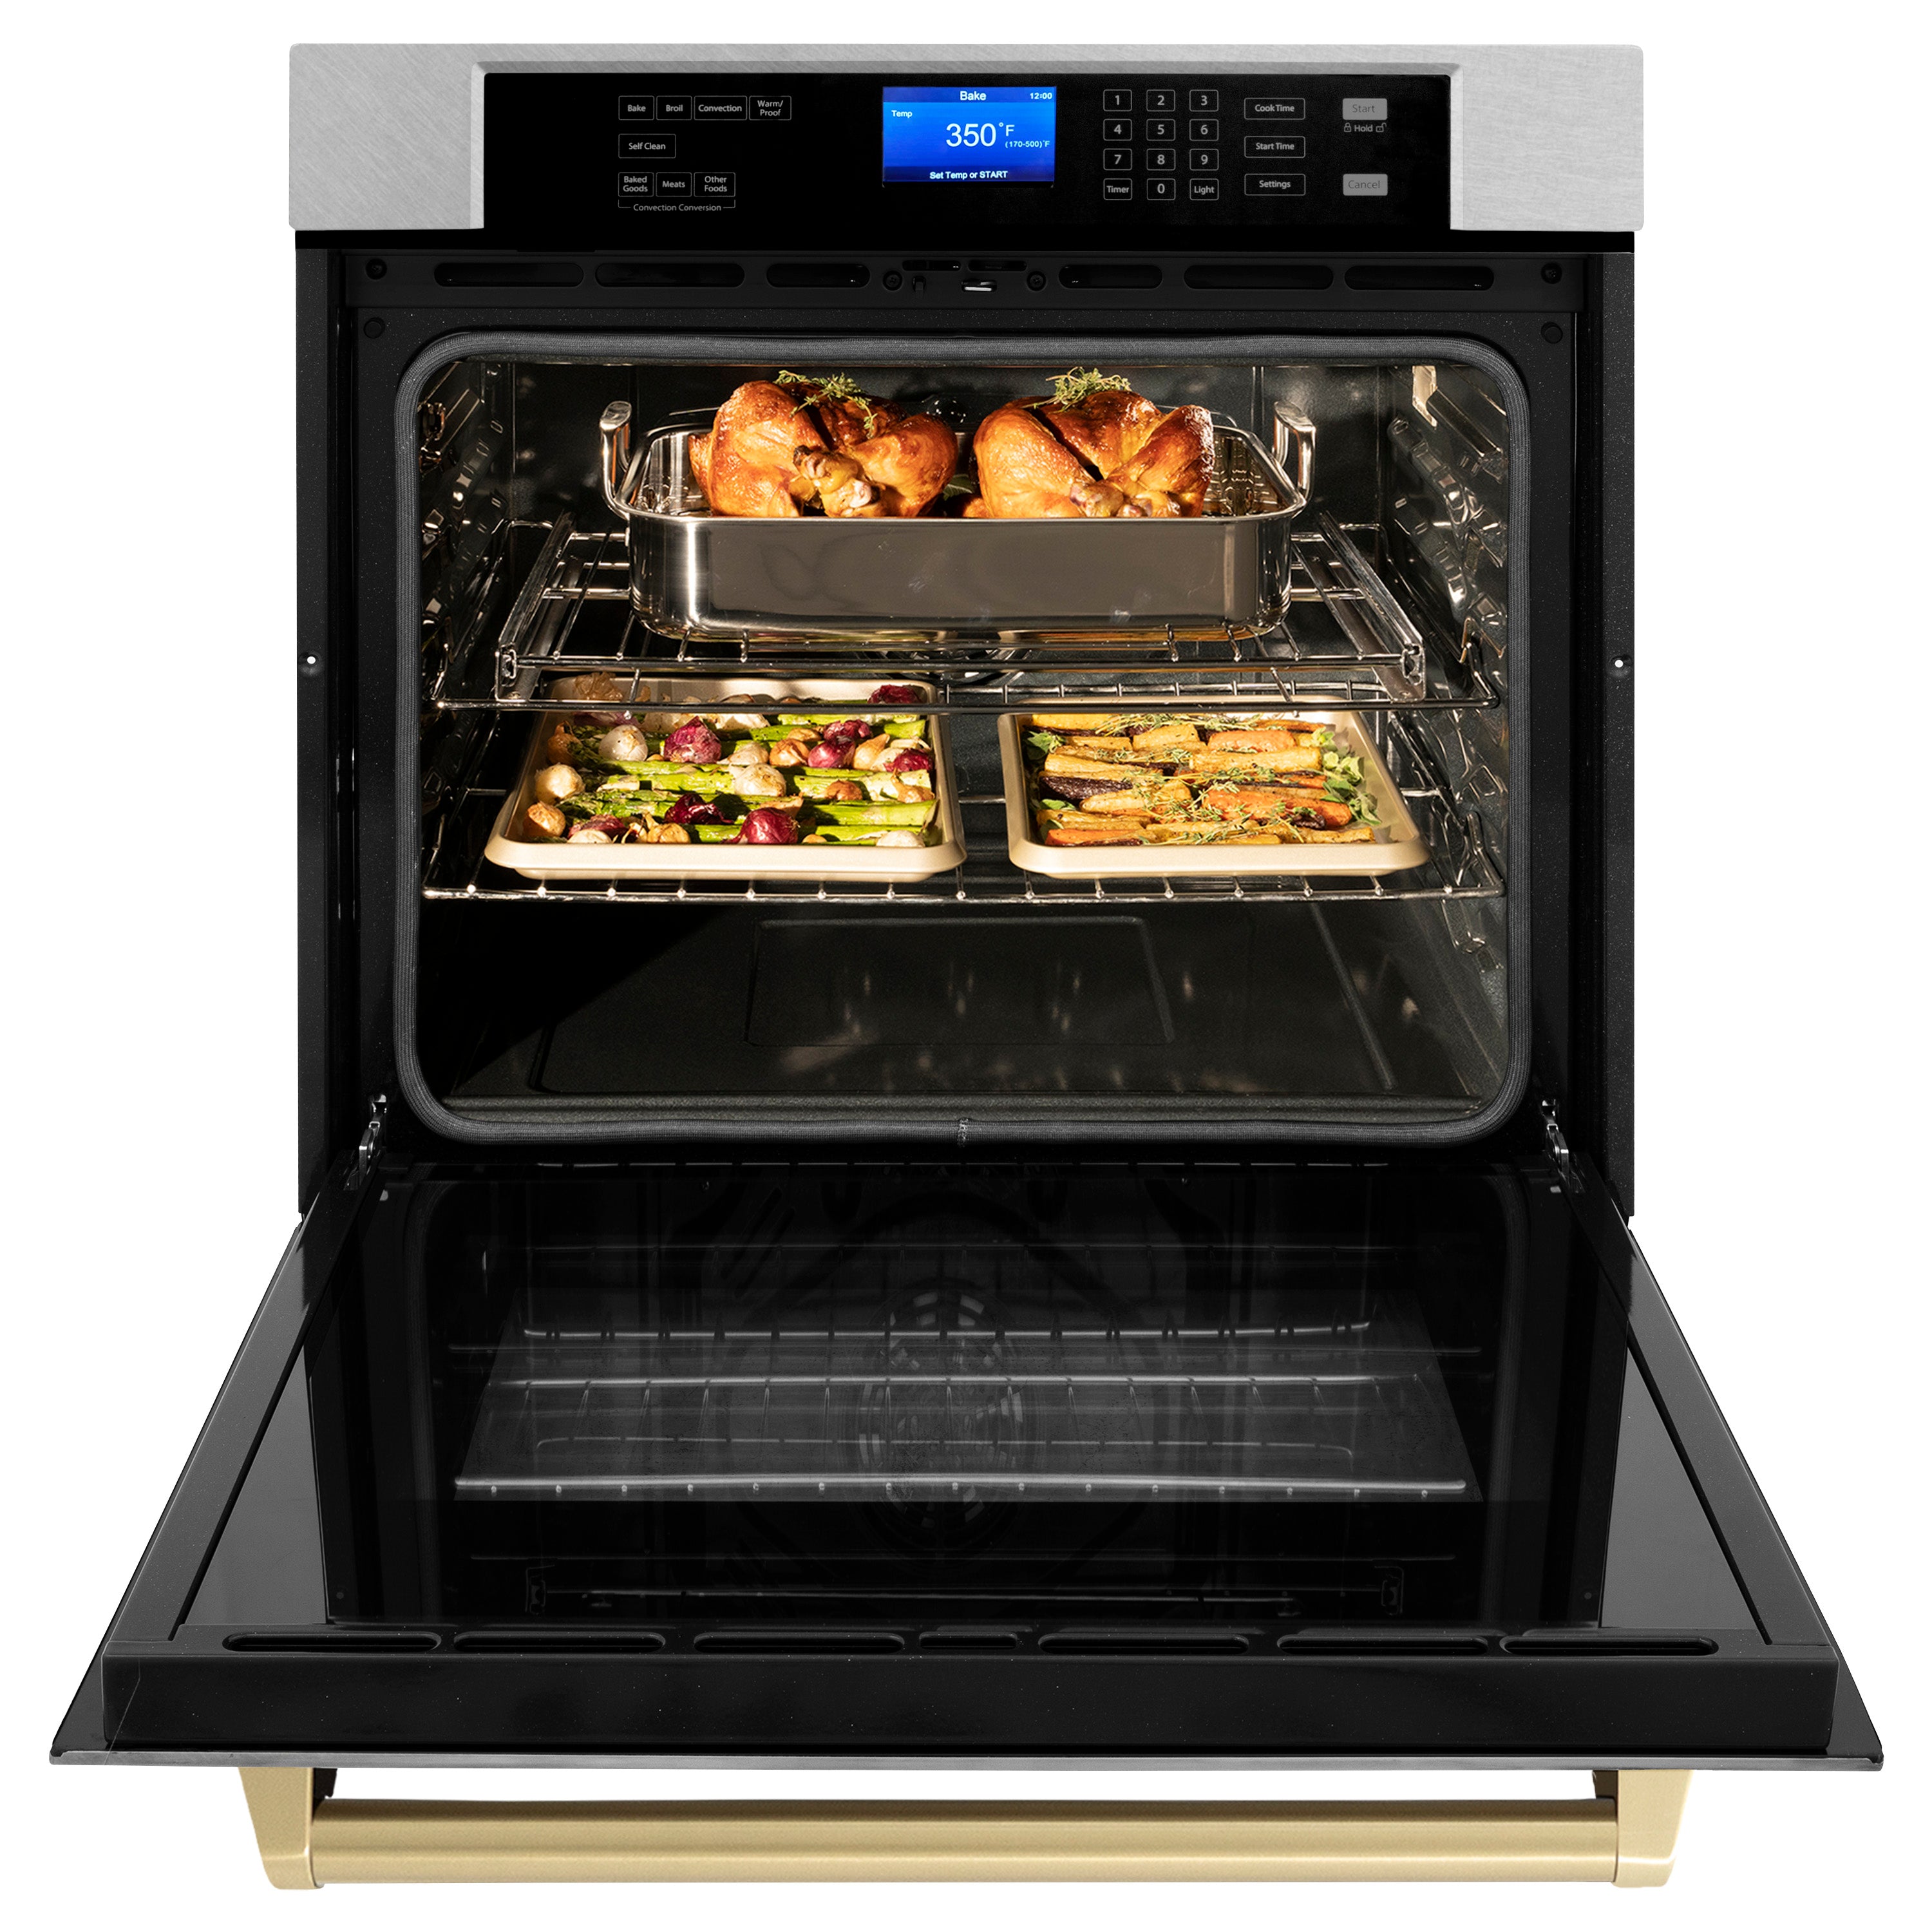 ZLINE 30" Autograph Edition Single Wall Oven with Self Clean and True Convection in Fingerprint Resistant Stainless Steel and Champagne Bronze (AWSSZ-30-CB)